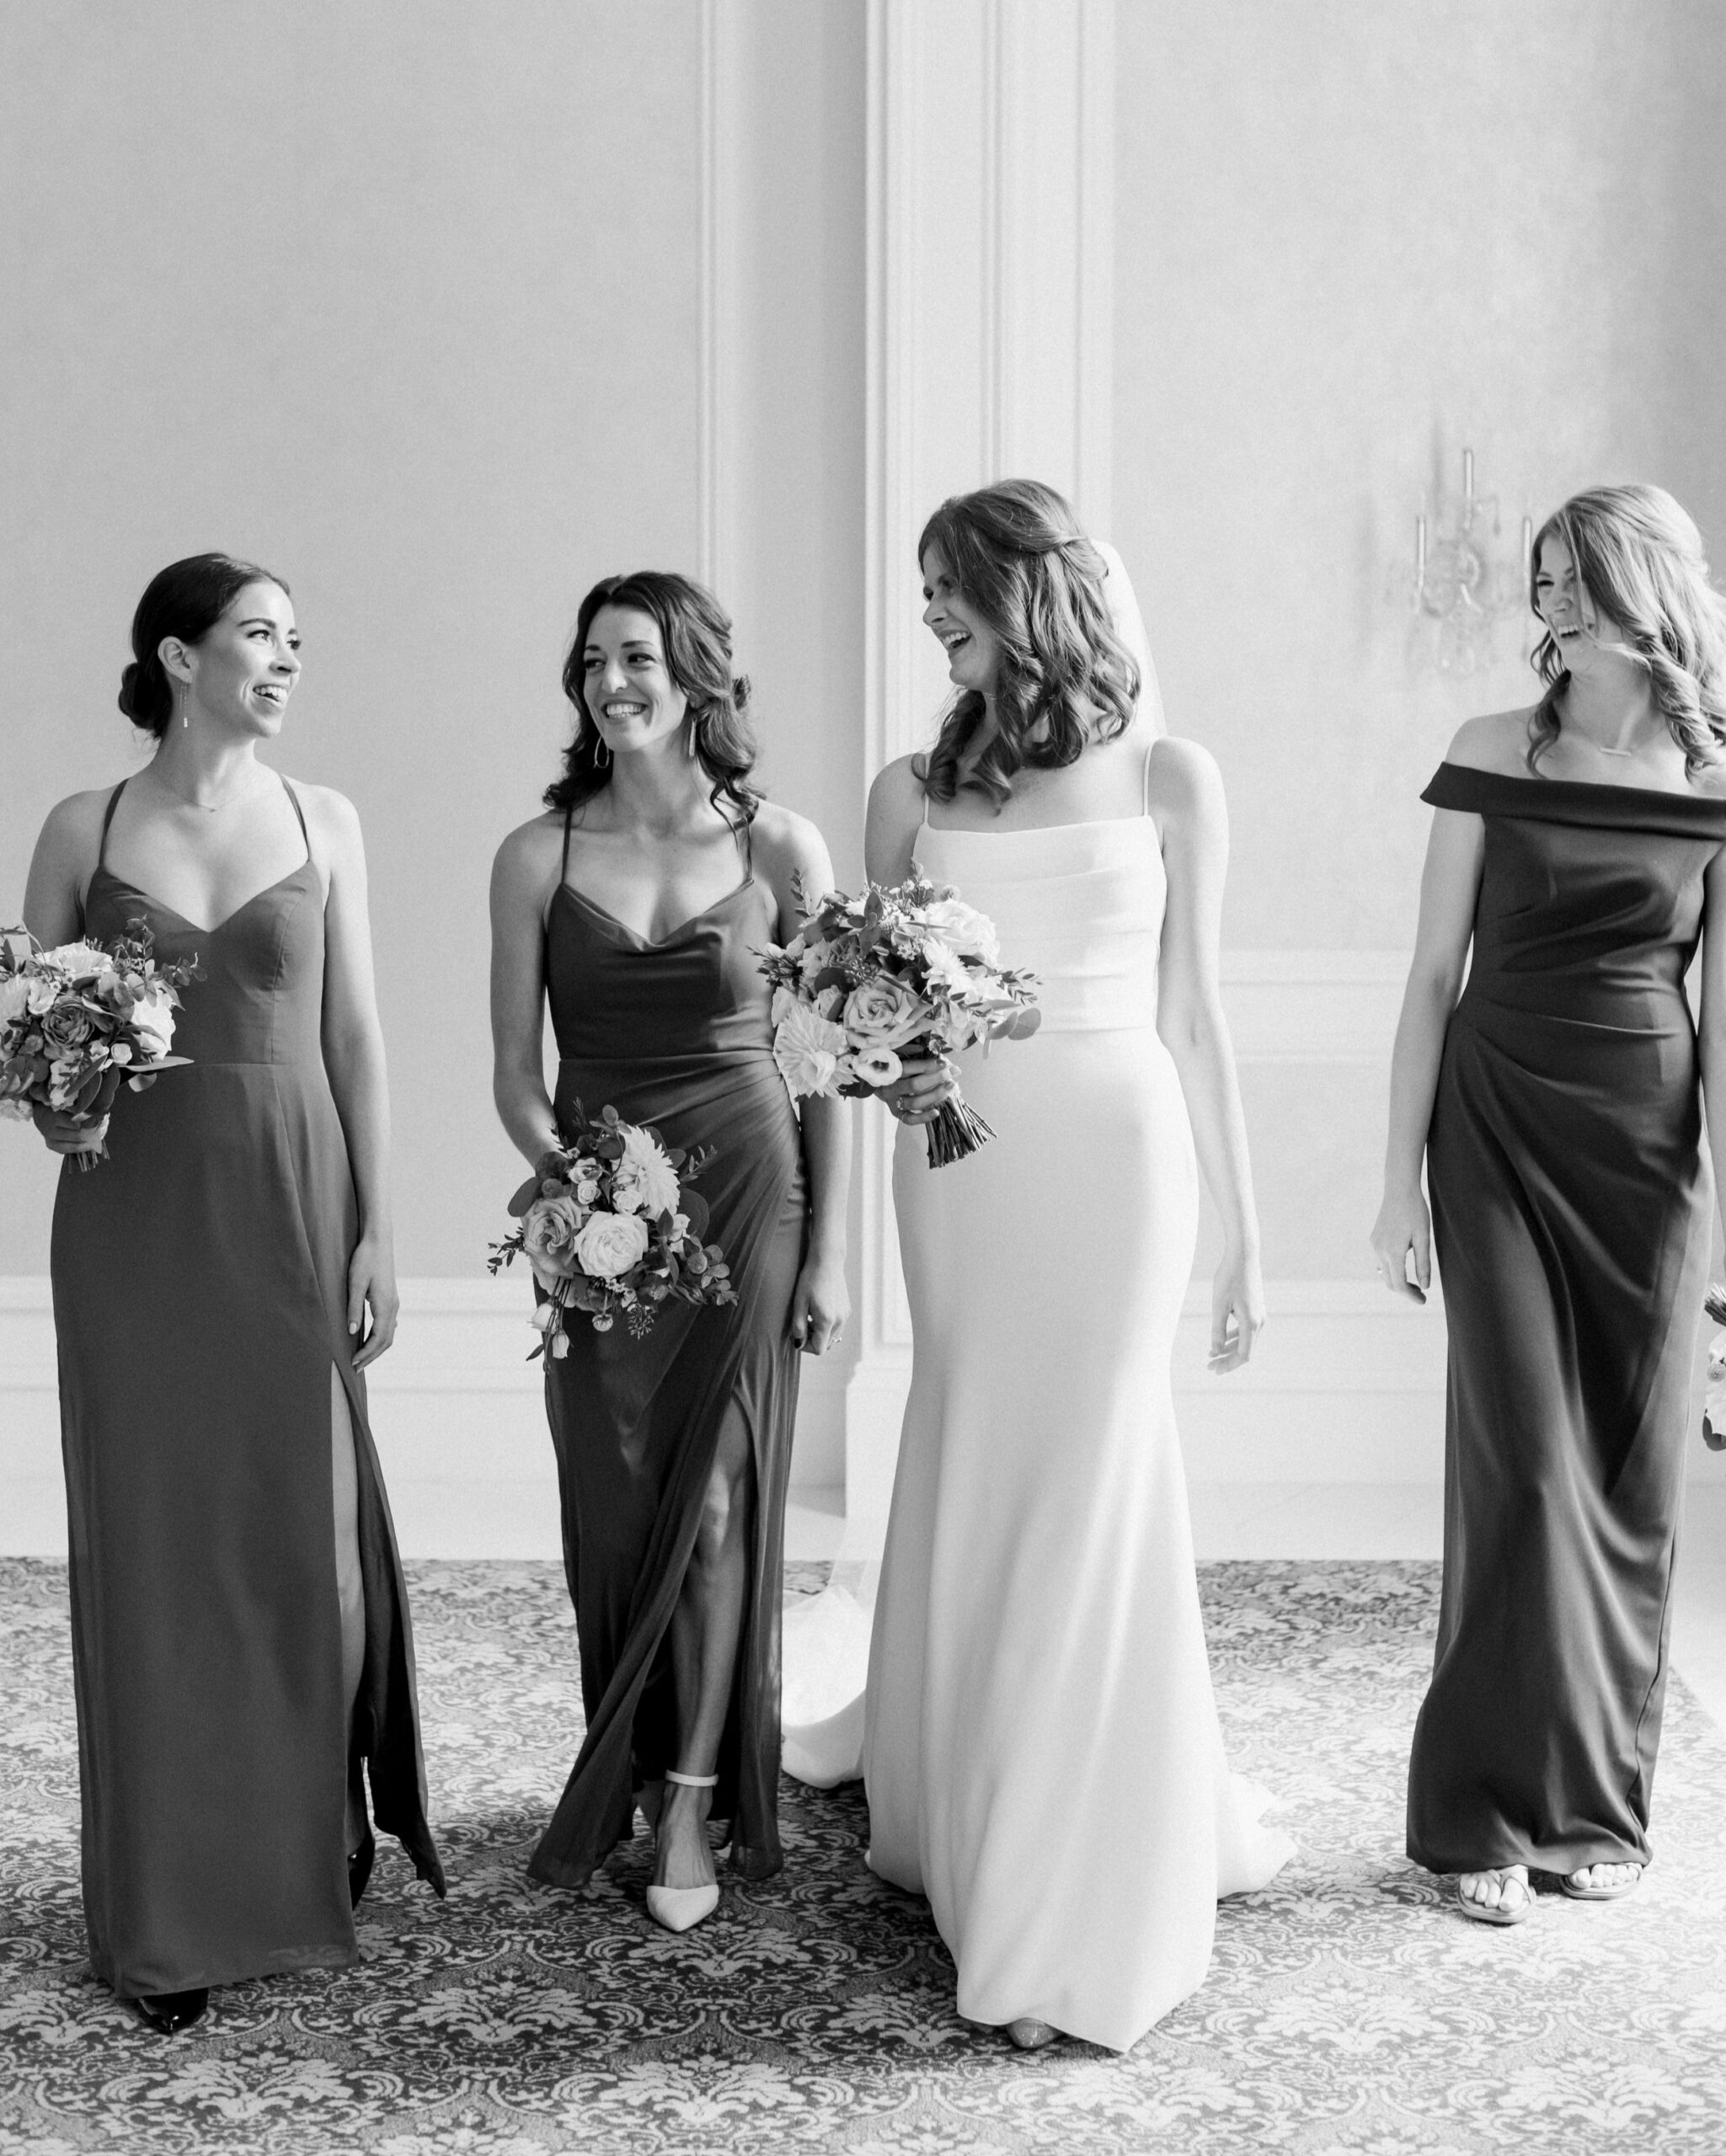 Bridal party photos at Lord Nelson Hotel